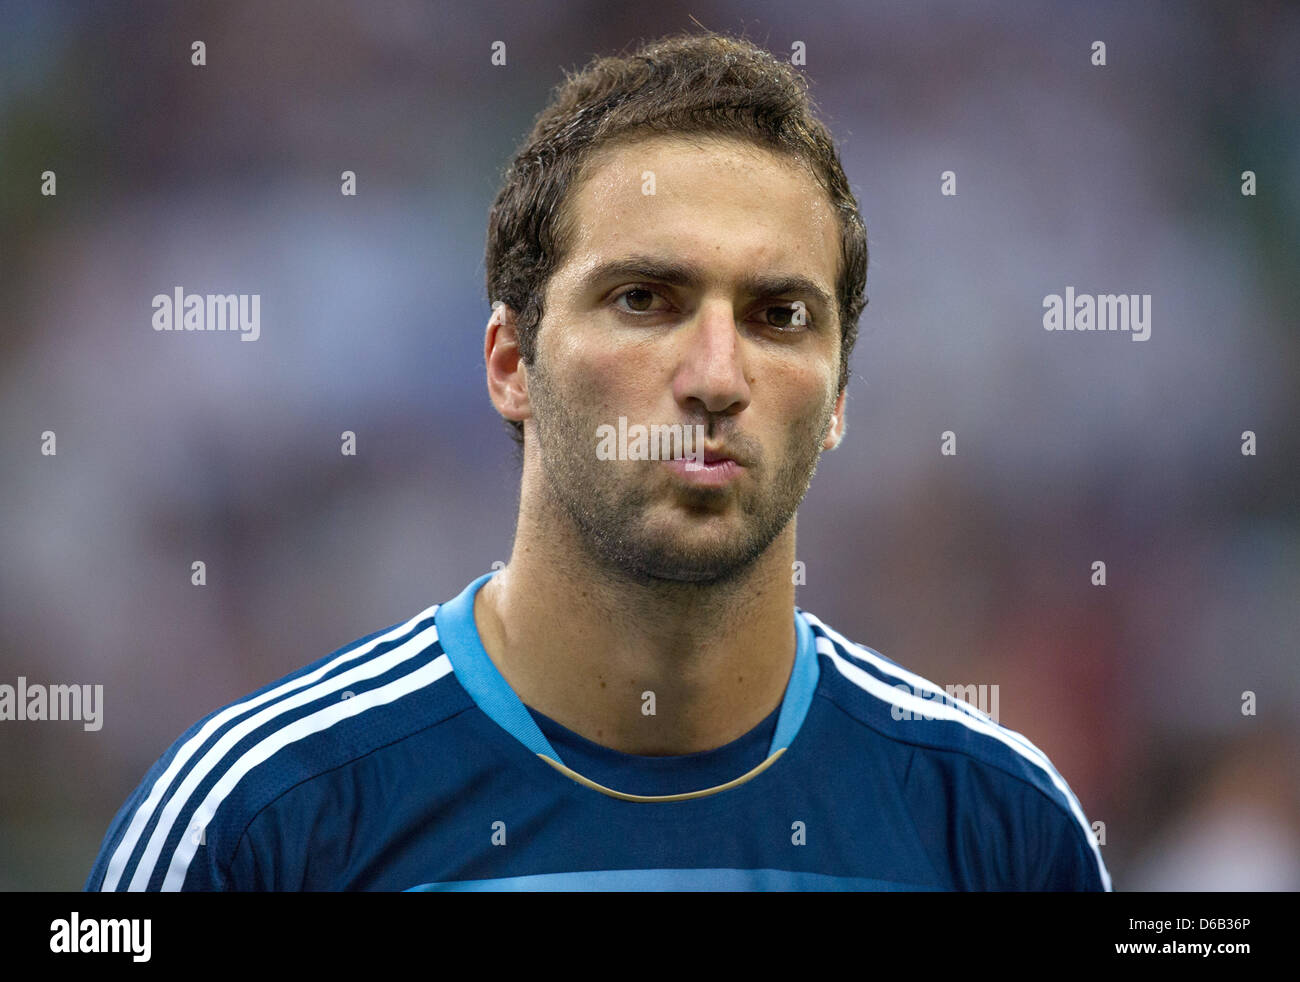 Argentina's Gonzalo Higuain during the friendly soccer match Germany against Argentina at the Commerzbank-Arena in Frankfurt/ Main, Germany, 15 August 2012. Photo: Uwe Anspach dpa/lhe Stock Photo